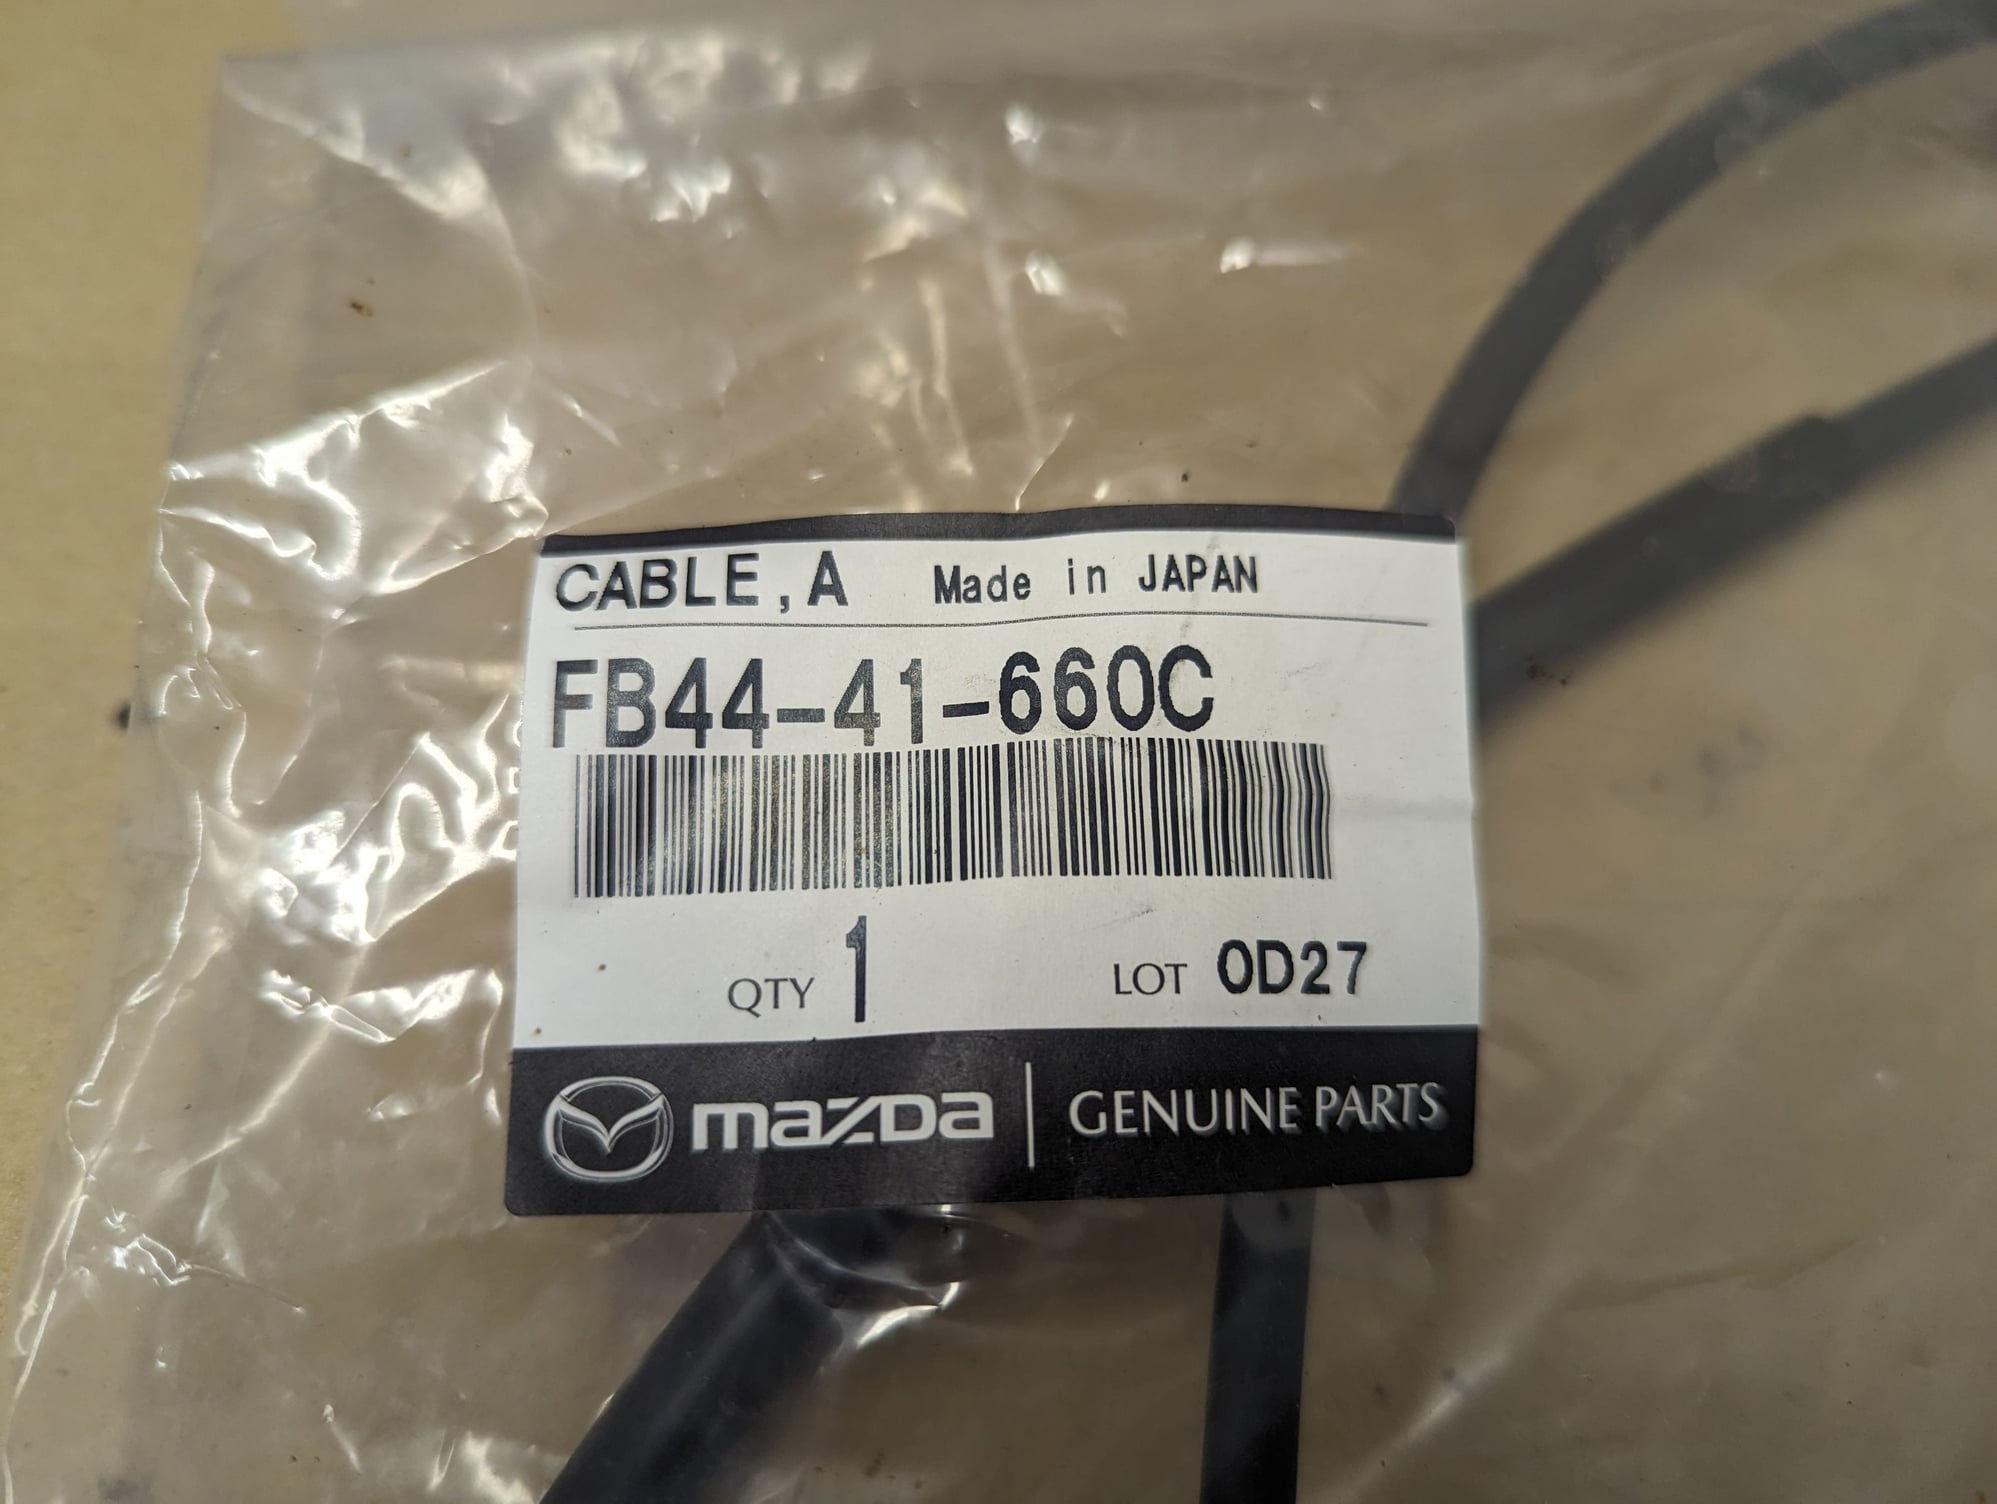 Miscellaneous - FC3S S4 86-88 Throttle Cable *NEW* - New - 1986 to 1988 Mazda RX-7 - Boston, MA 02130, United States